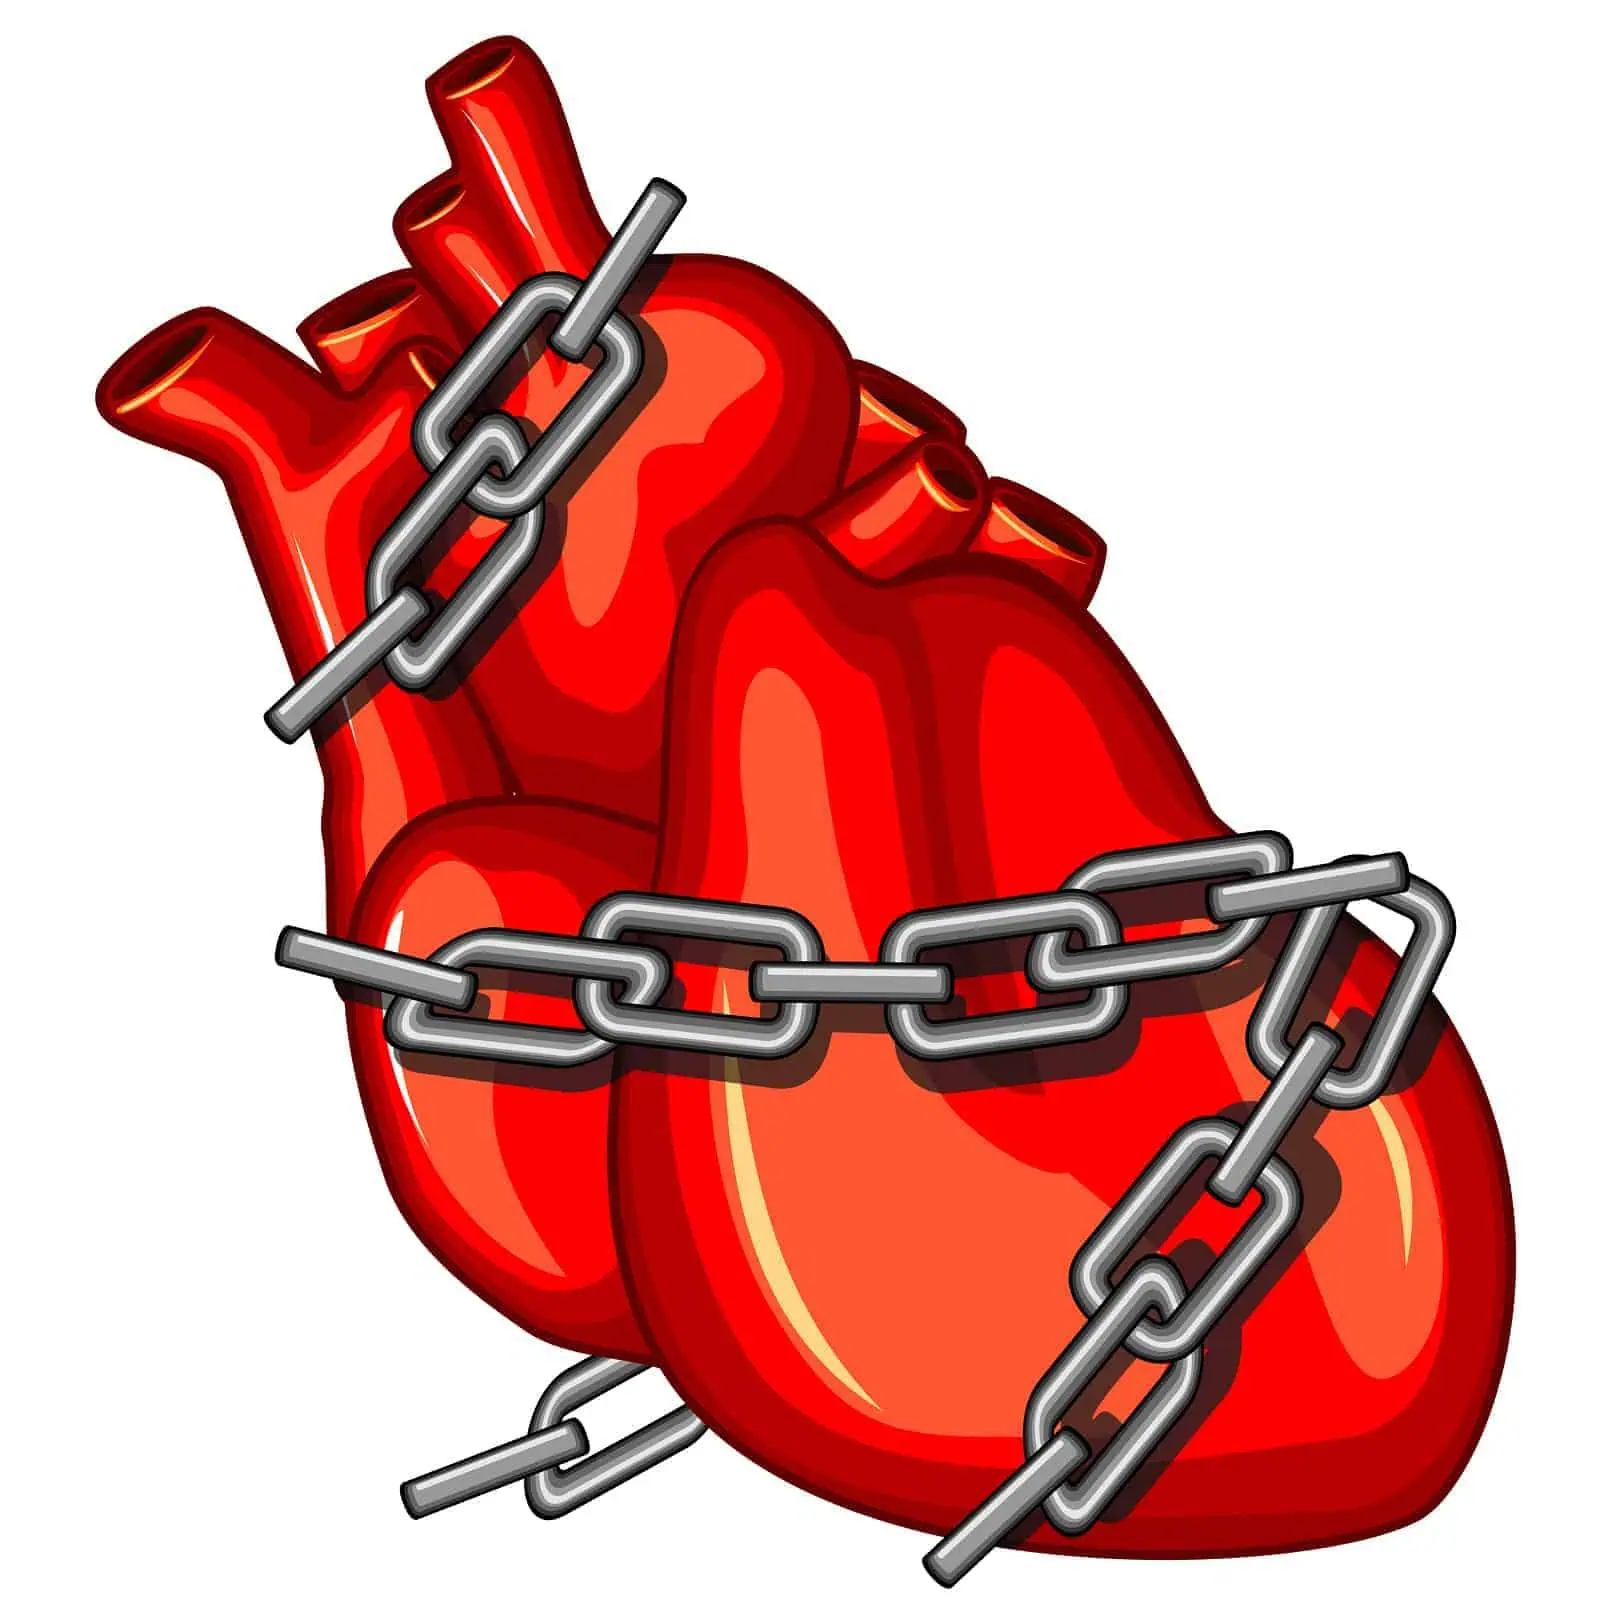 Heart wrapped in chain